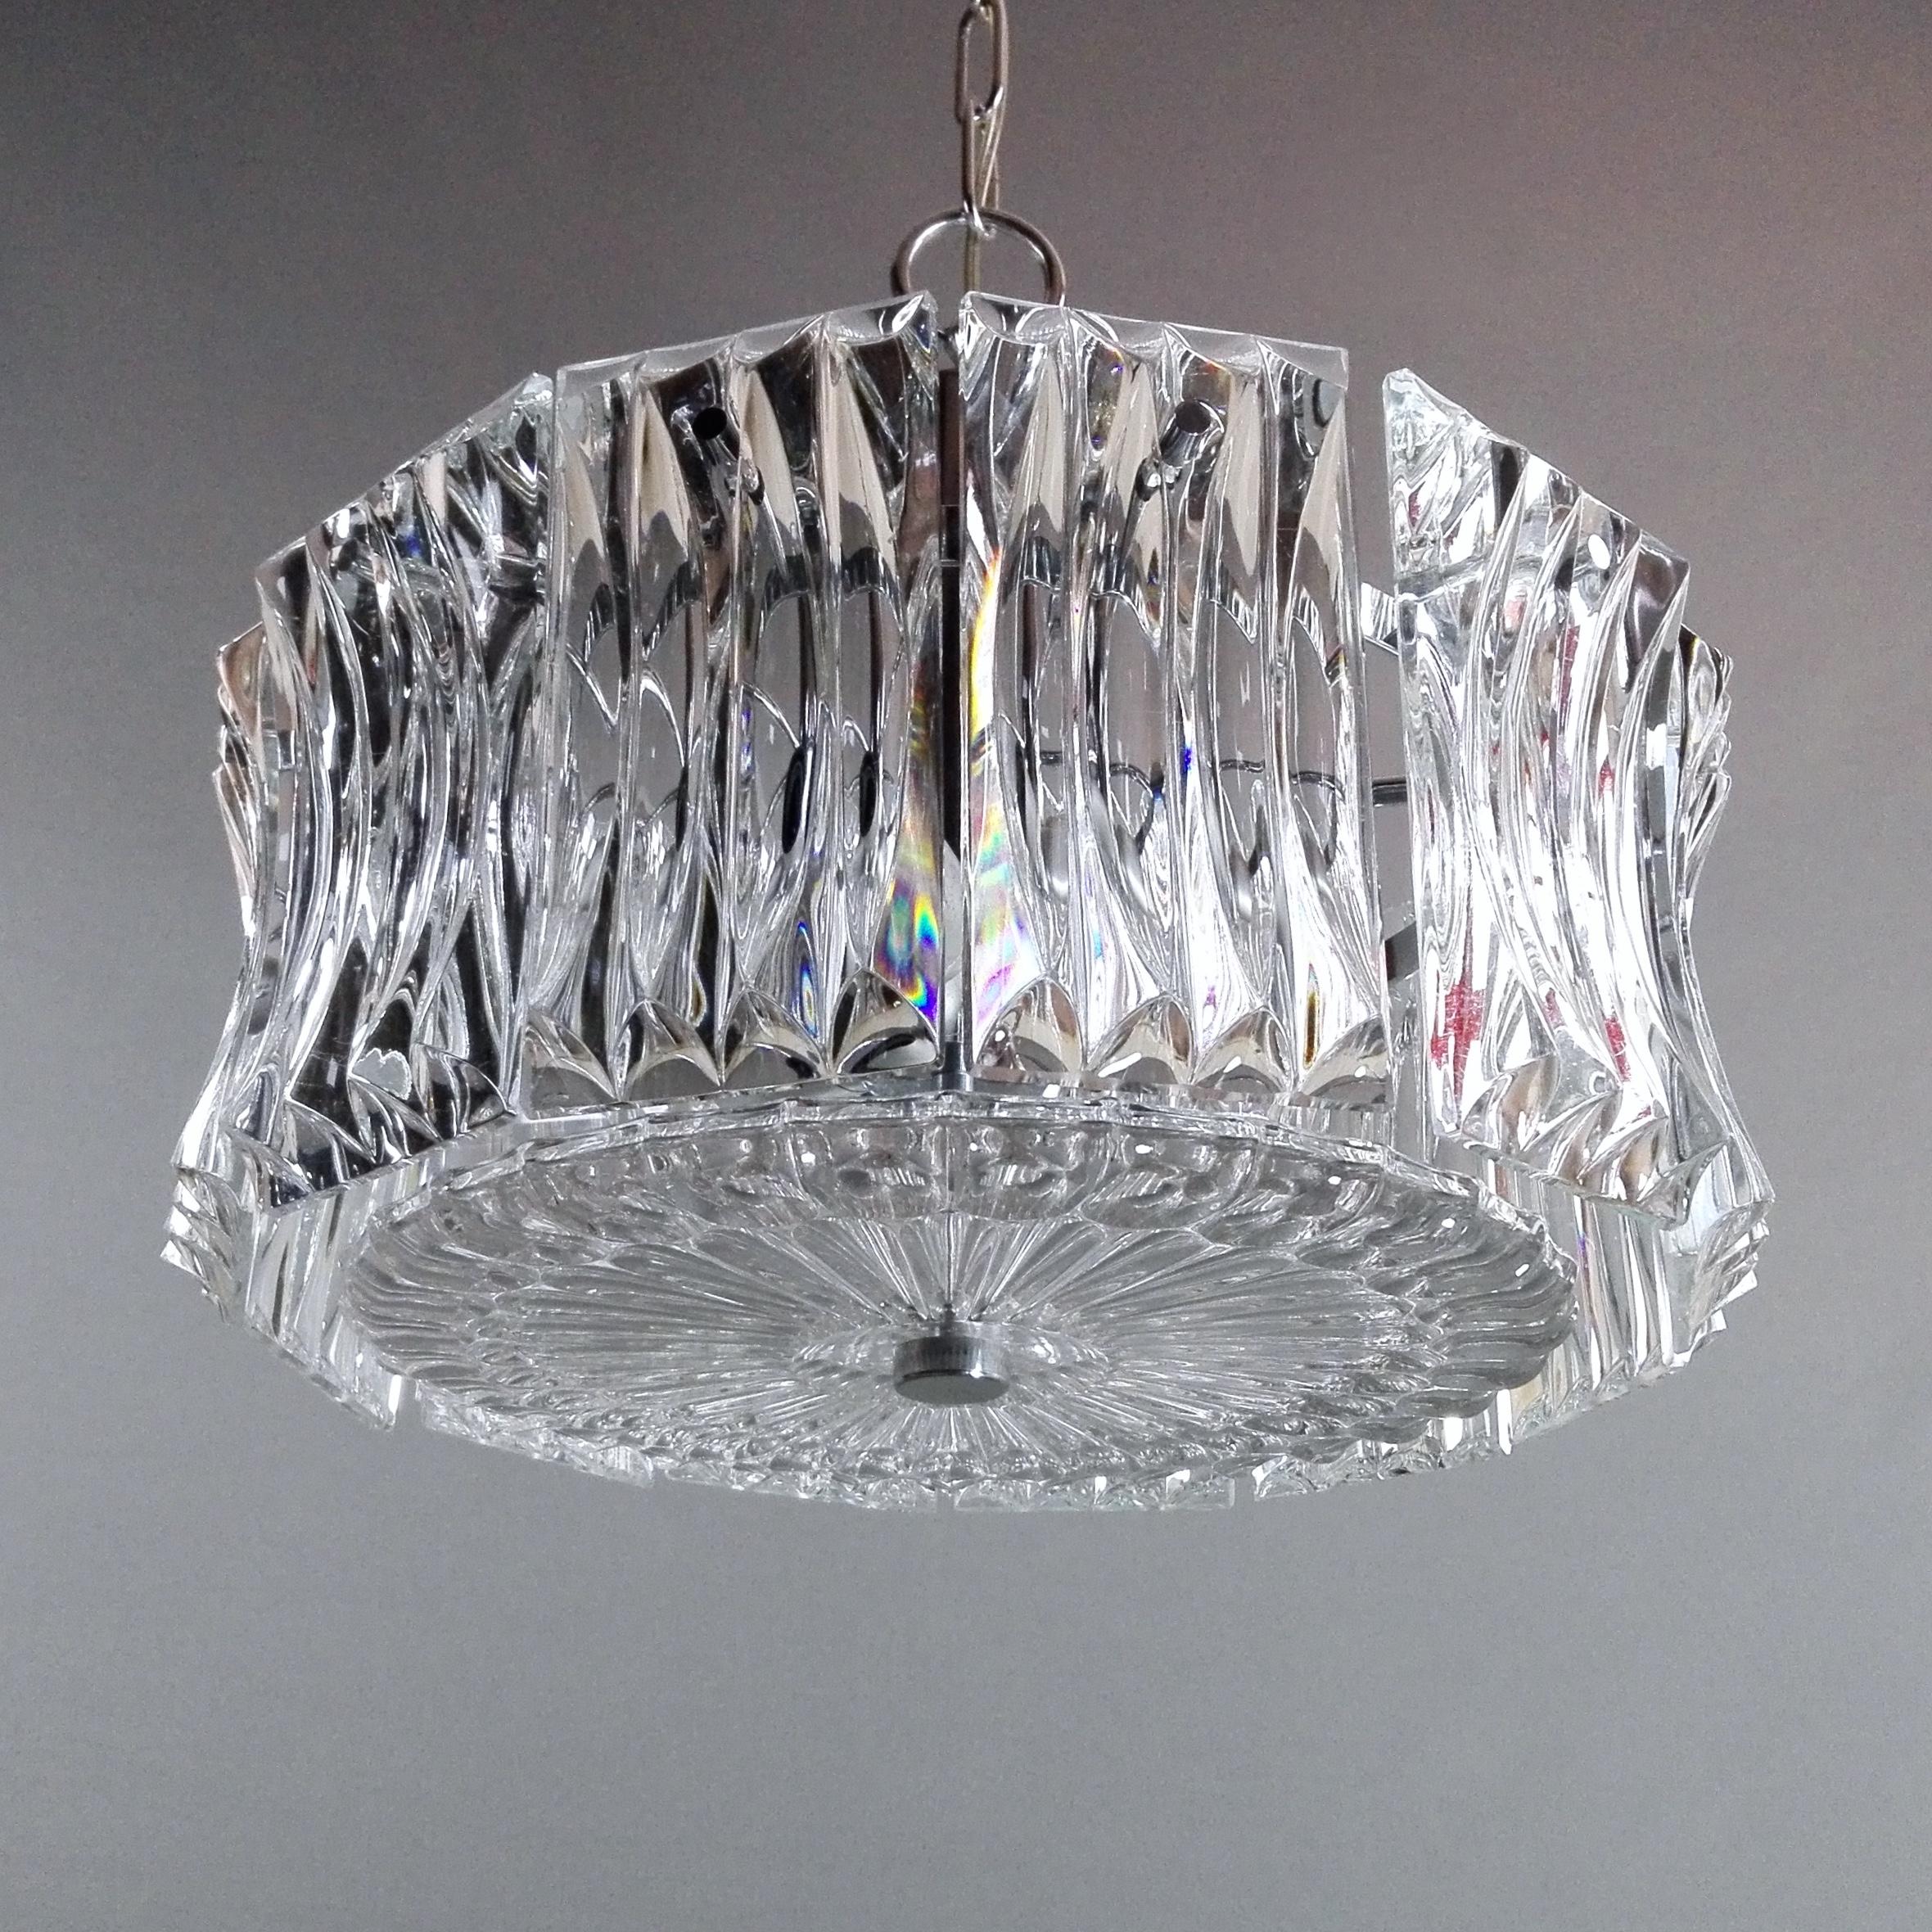 1960s Paolo Venini attributable Murano Glass and Chrome Three-Light Chandelier For Sale 1